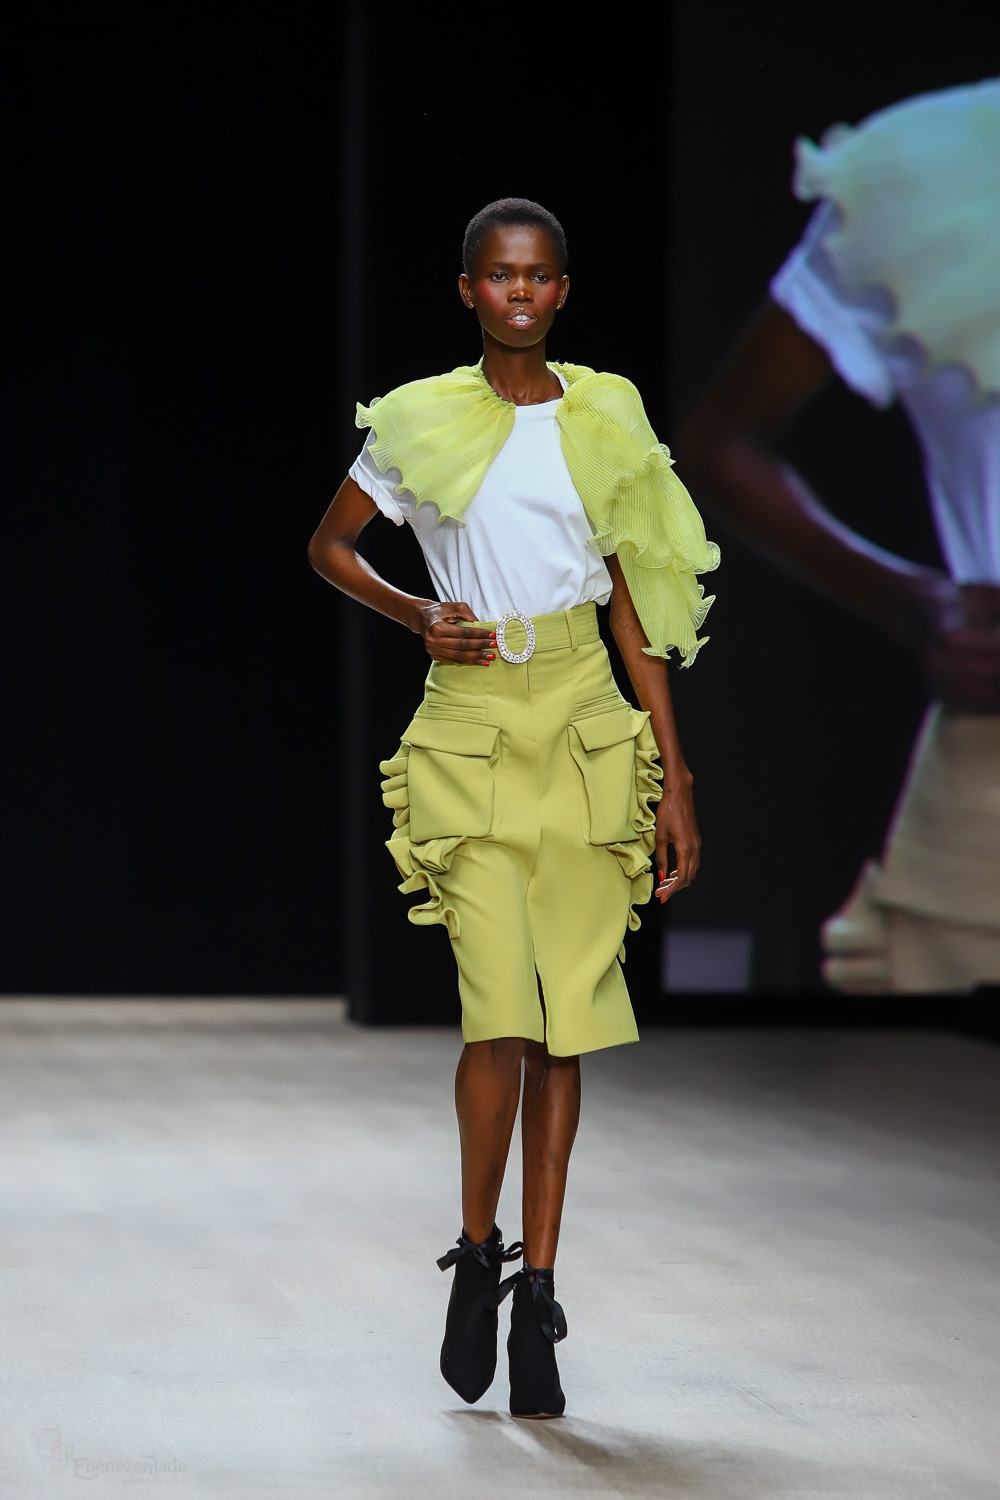 ARISE Fashion Week 2019 Day 3 — Style Temple